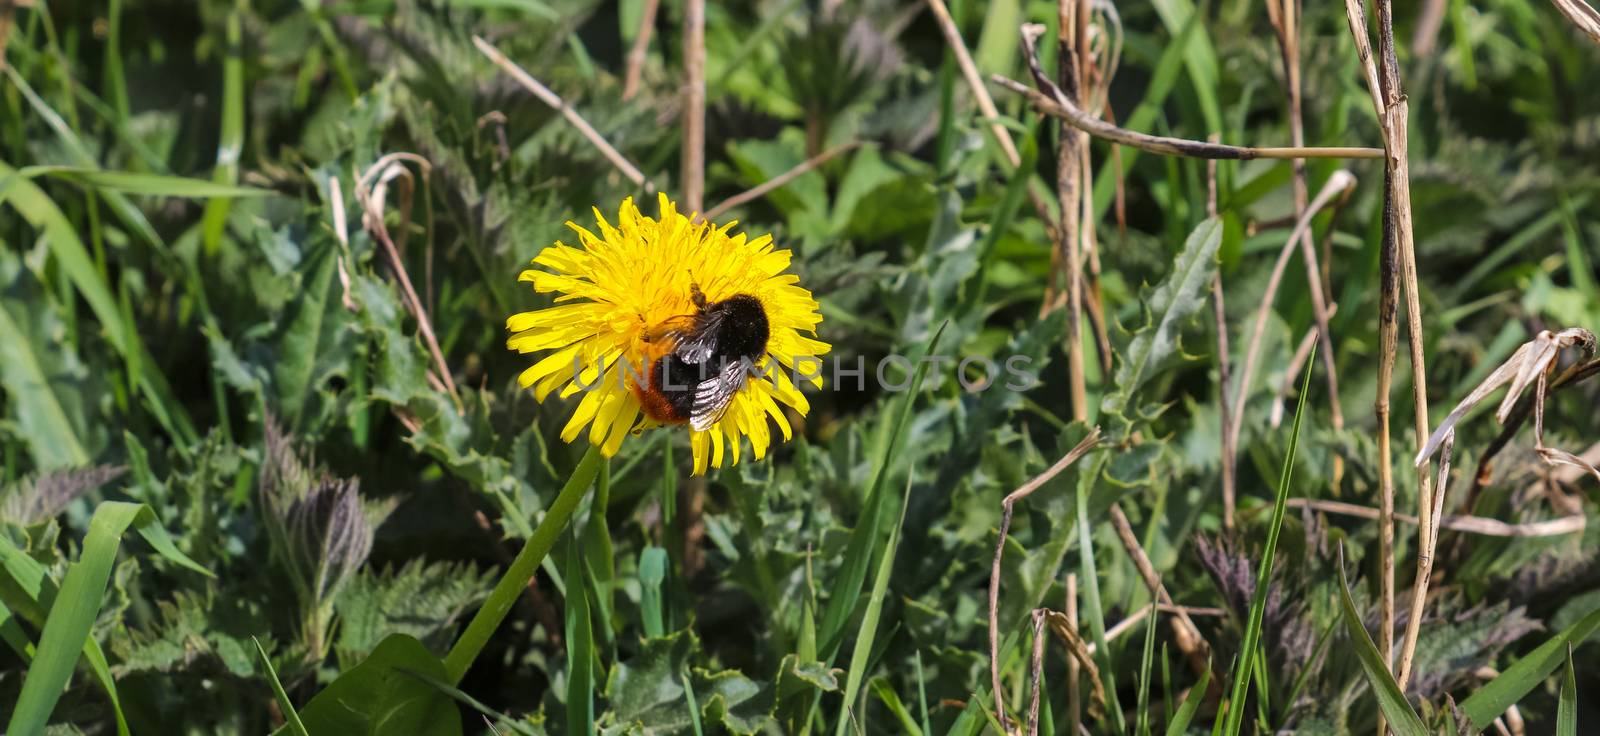 Insects and Bumblebees on yellow dandelion flowers during spring by MP_foto71